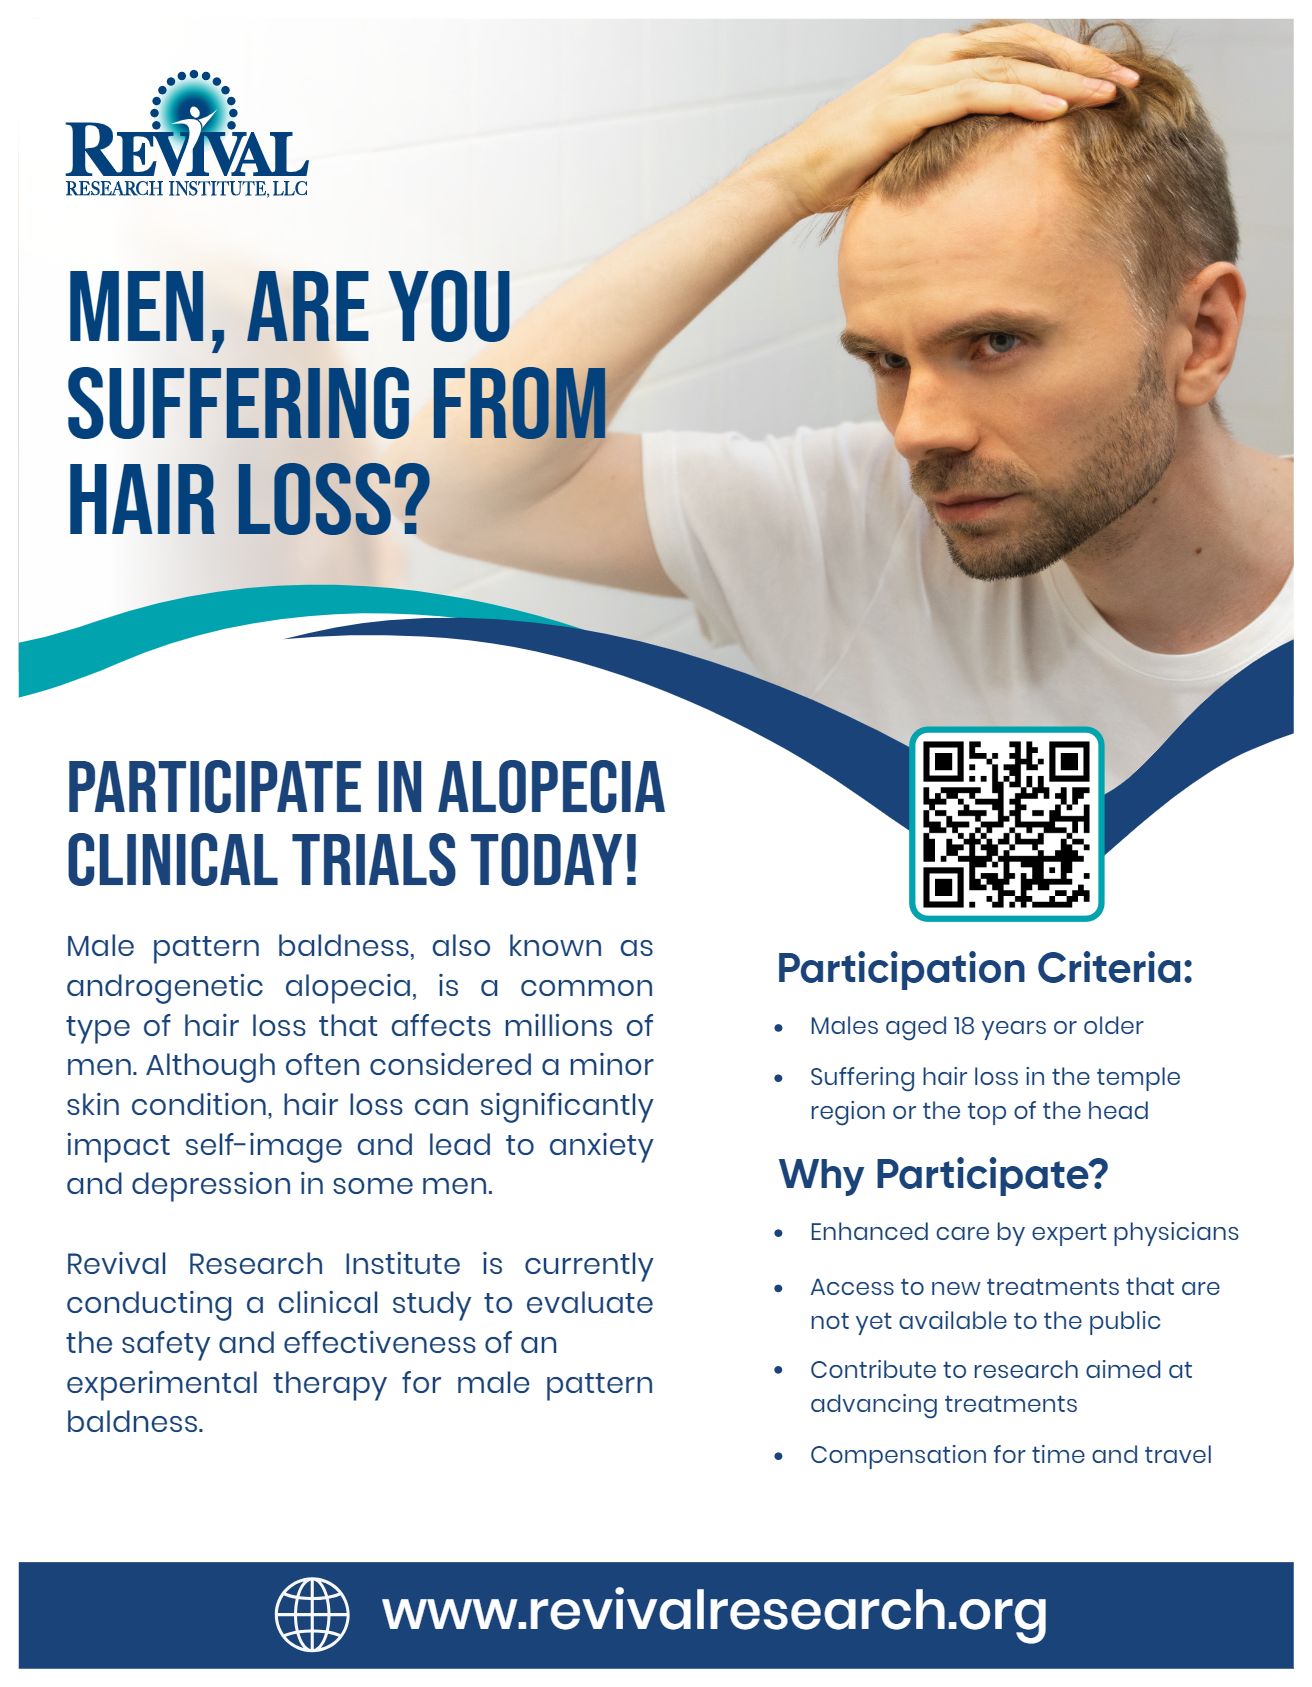 Androgenetic alopecia clinical trials in Michigan